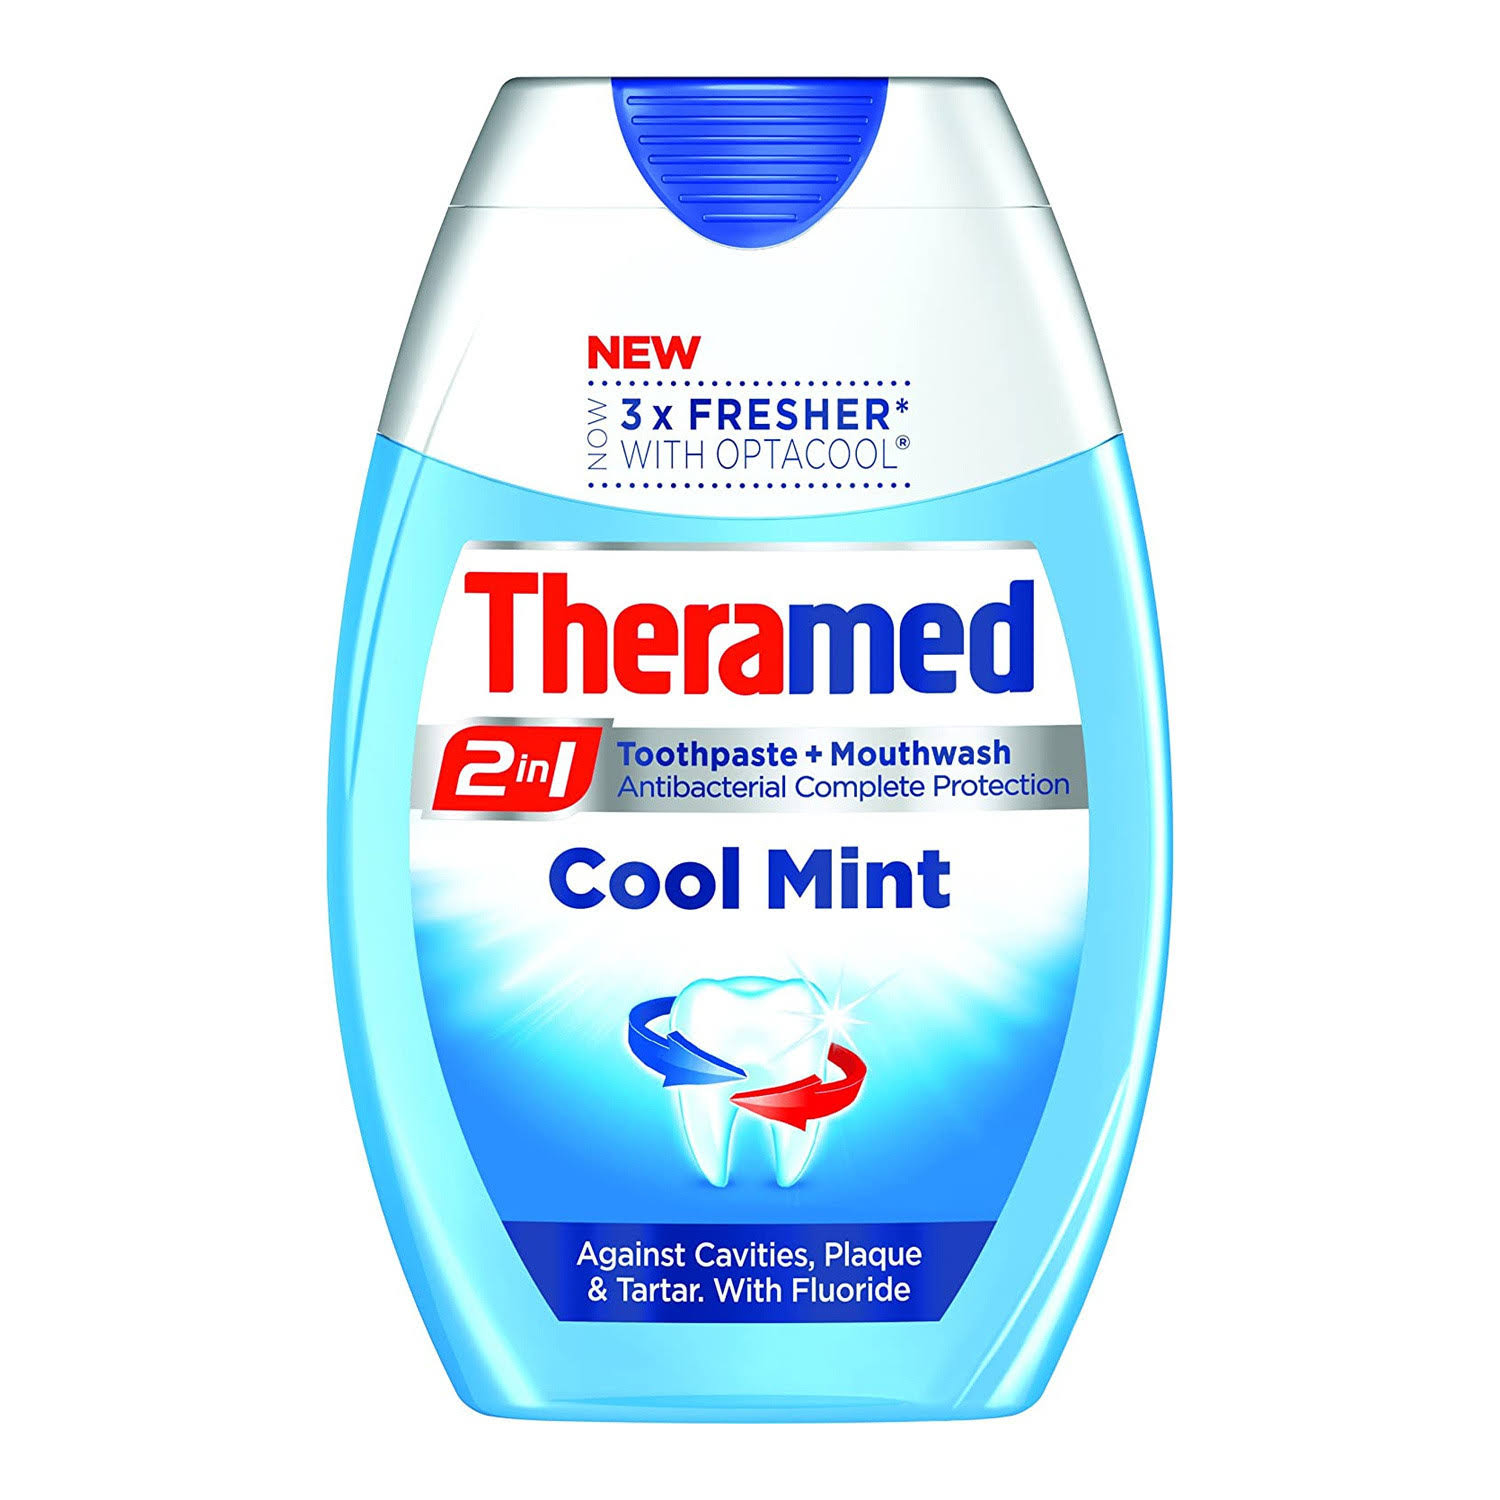 Thermamed 2in1 12hr Active Toothpaste + Mouthwash Cool Mint